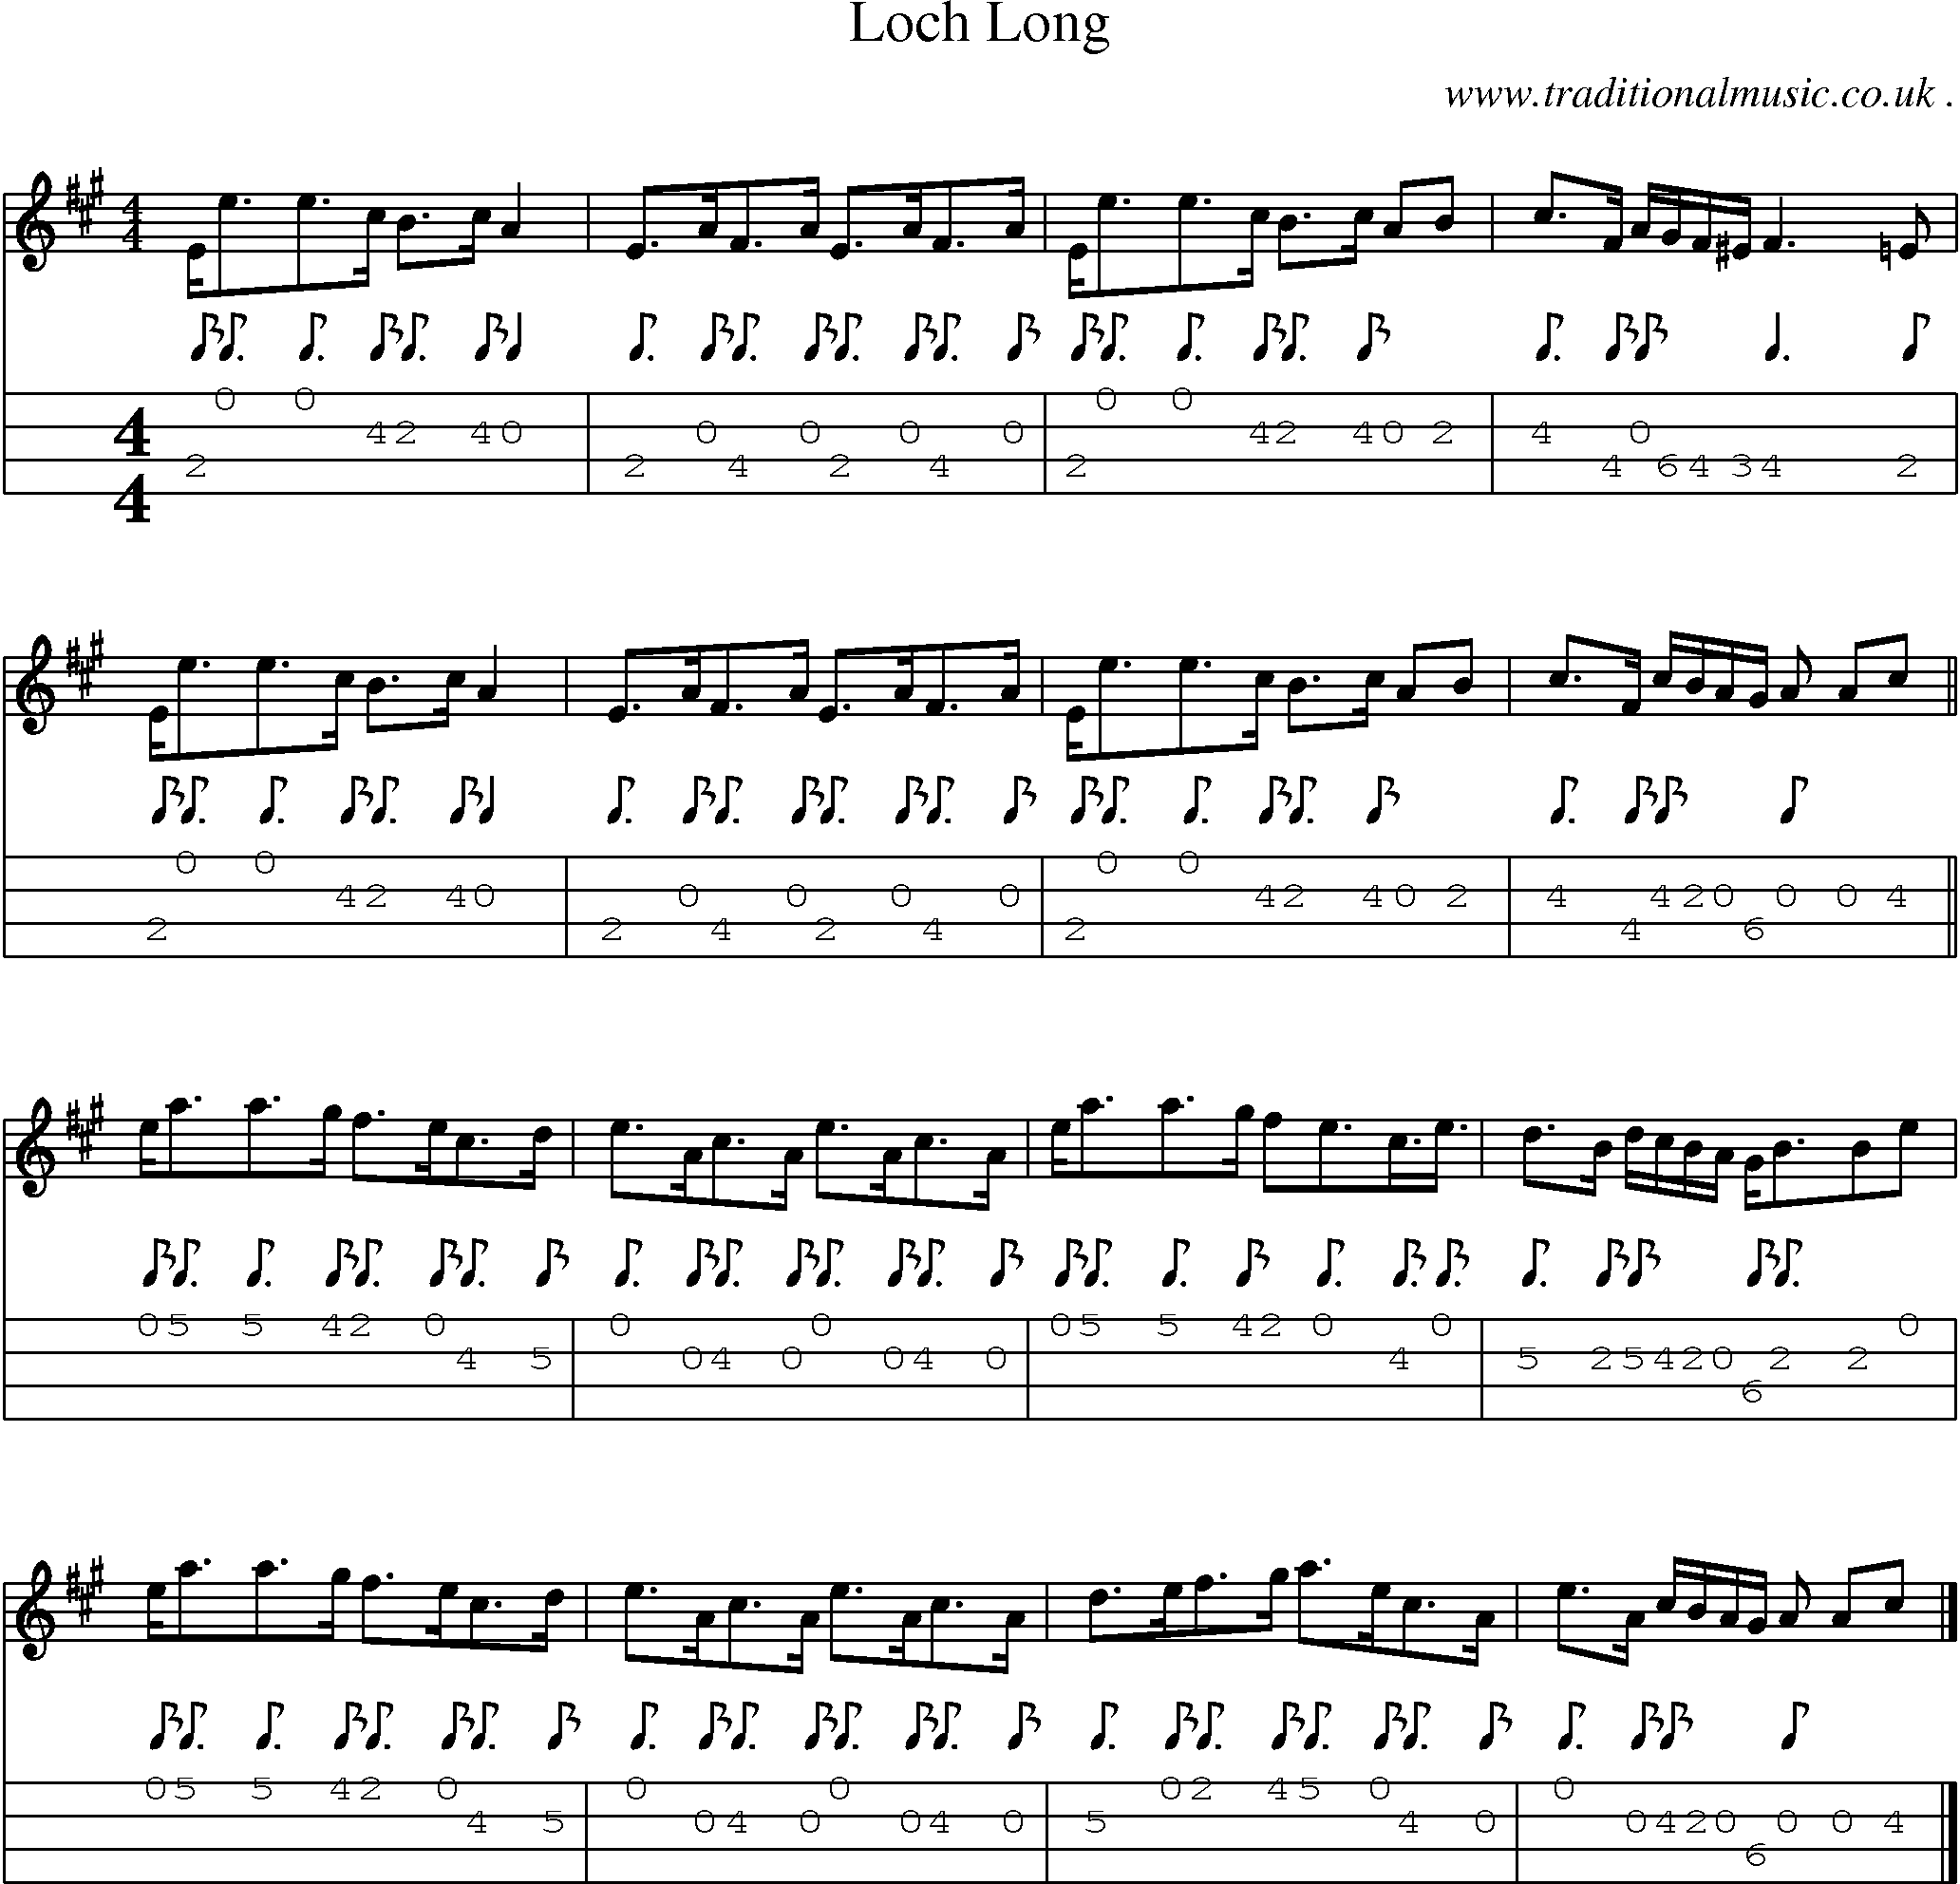 Sheet-music  score, Chords and Mandolin Tabs for Loch Long